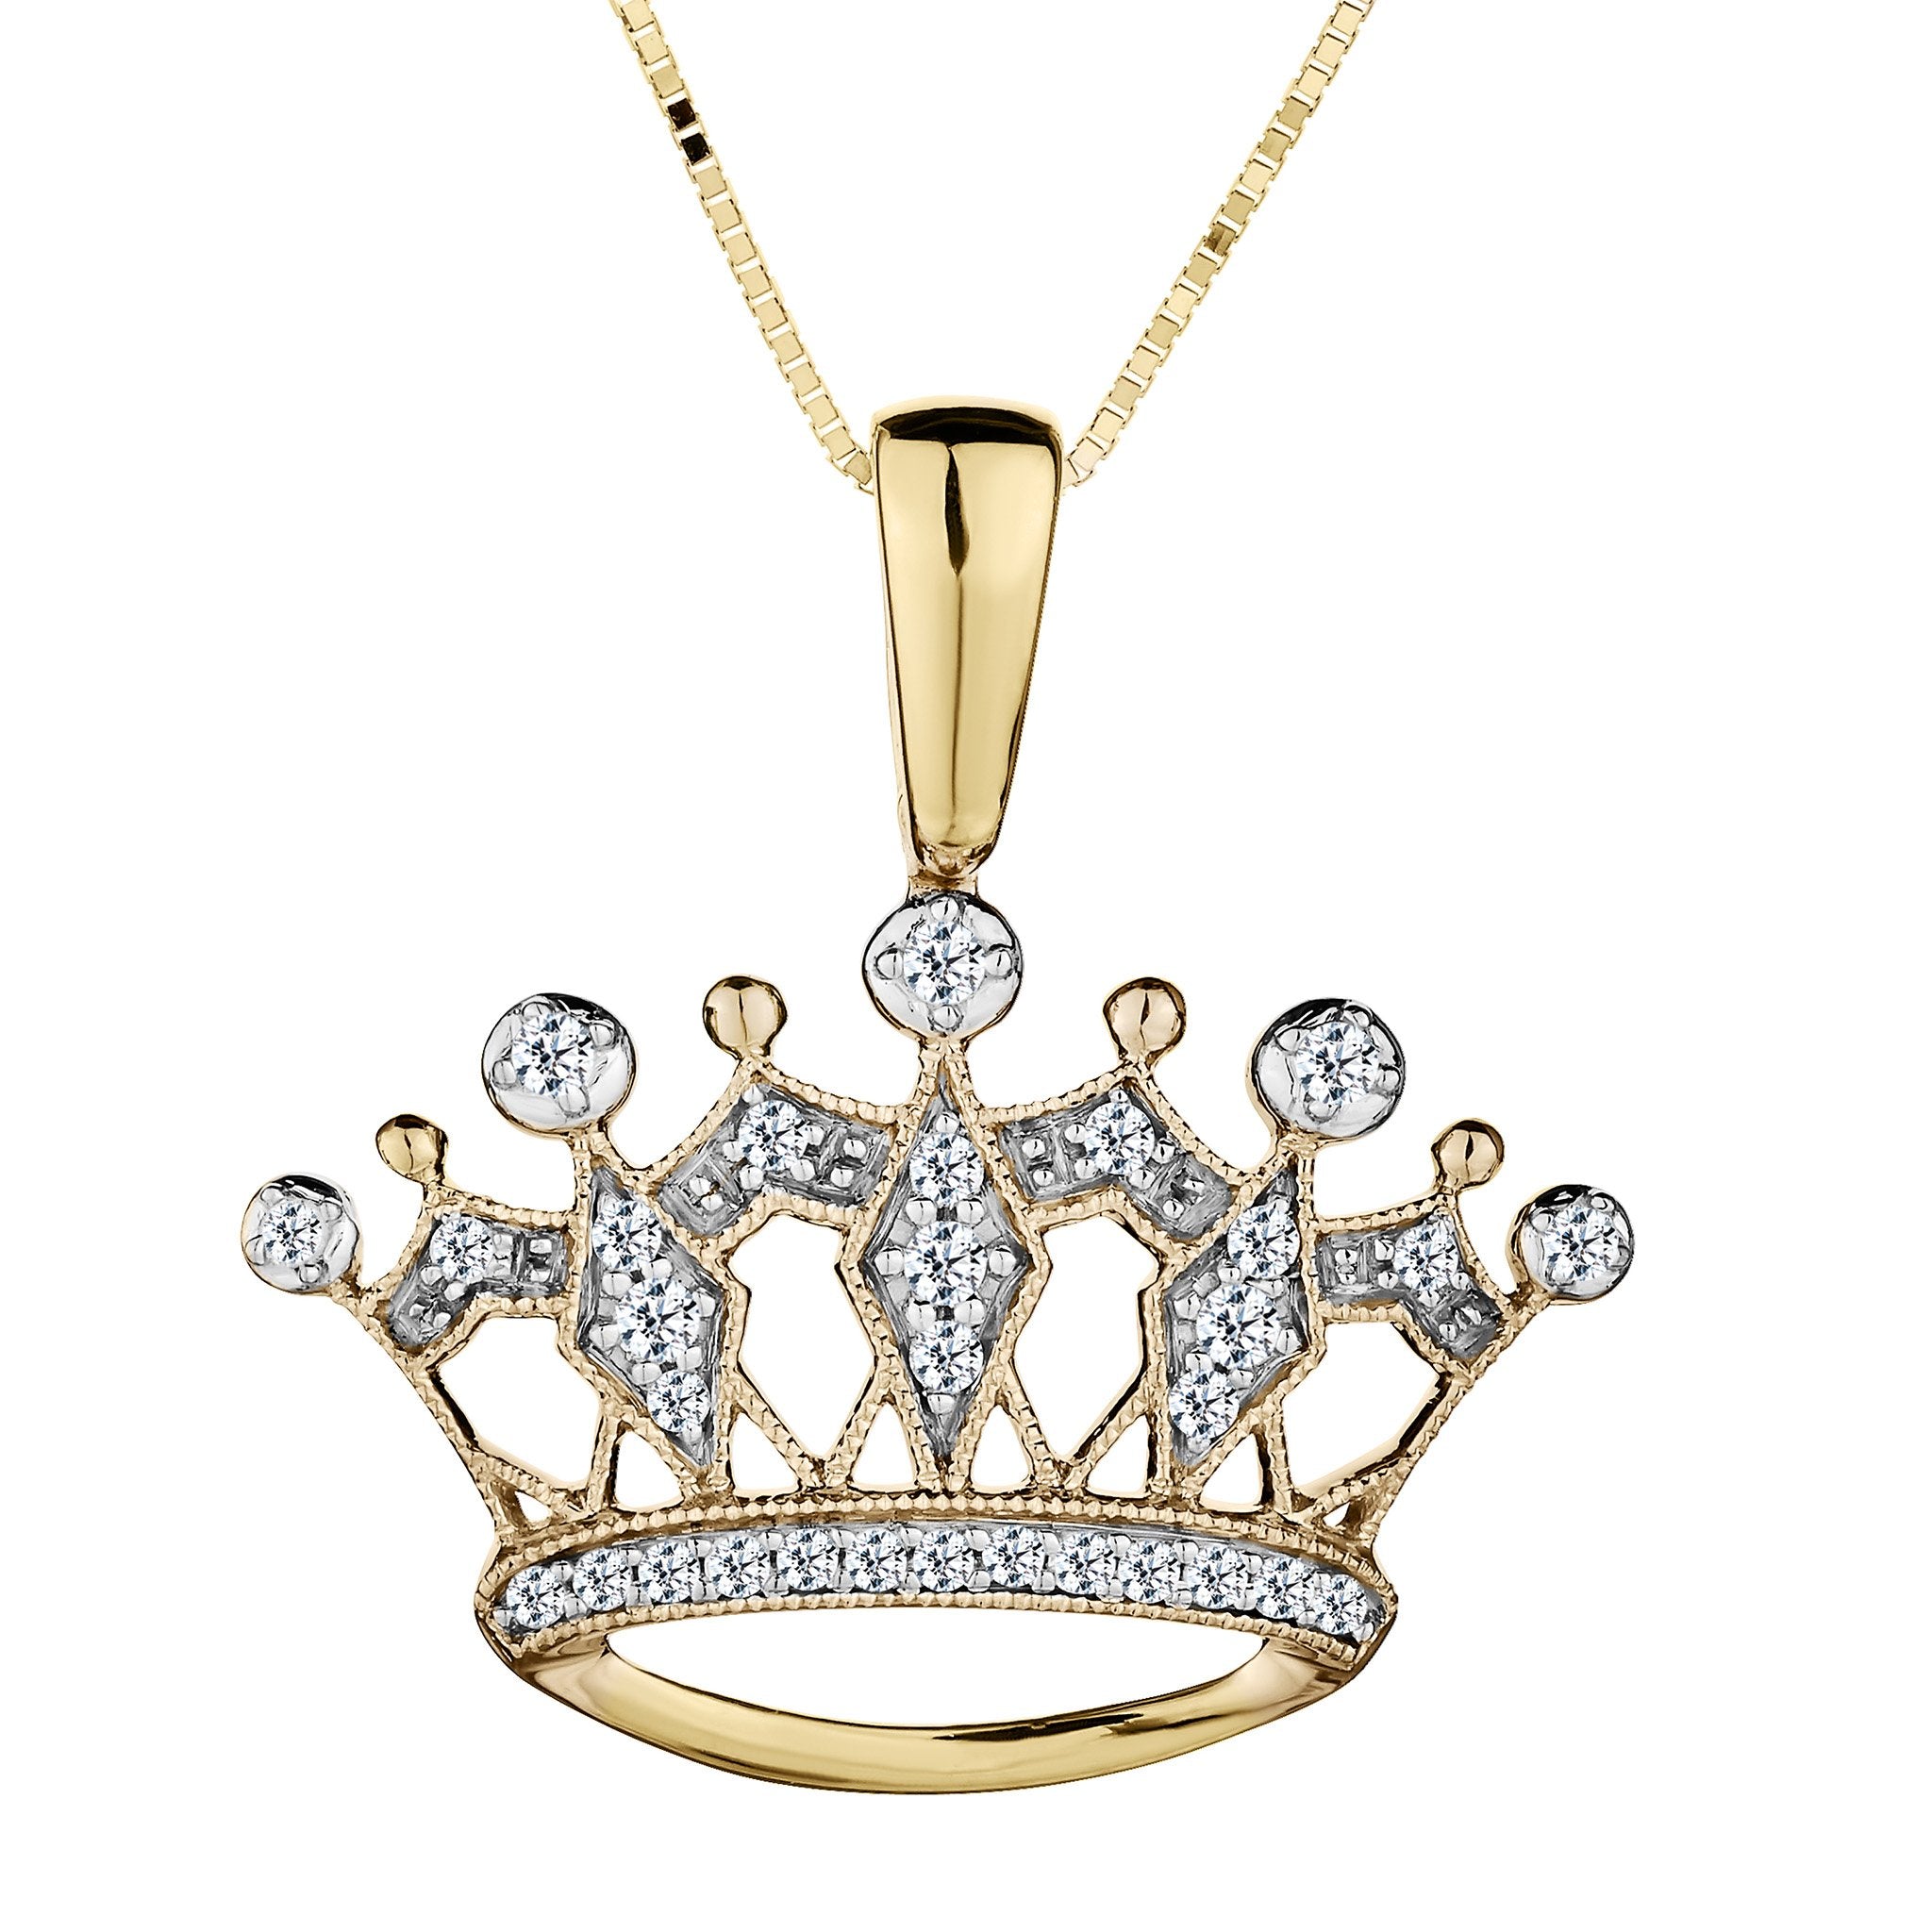 .13 Carat Diamond Crown Pendant,  10kt Yellow Gold. Necklaces and Pendants. Griffin Jewellery Designs.